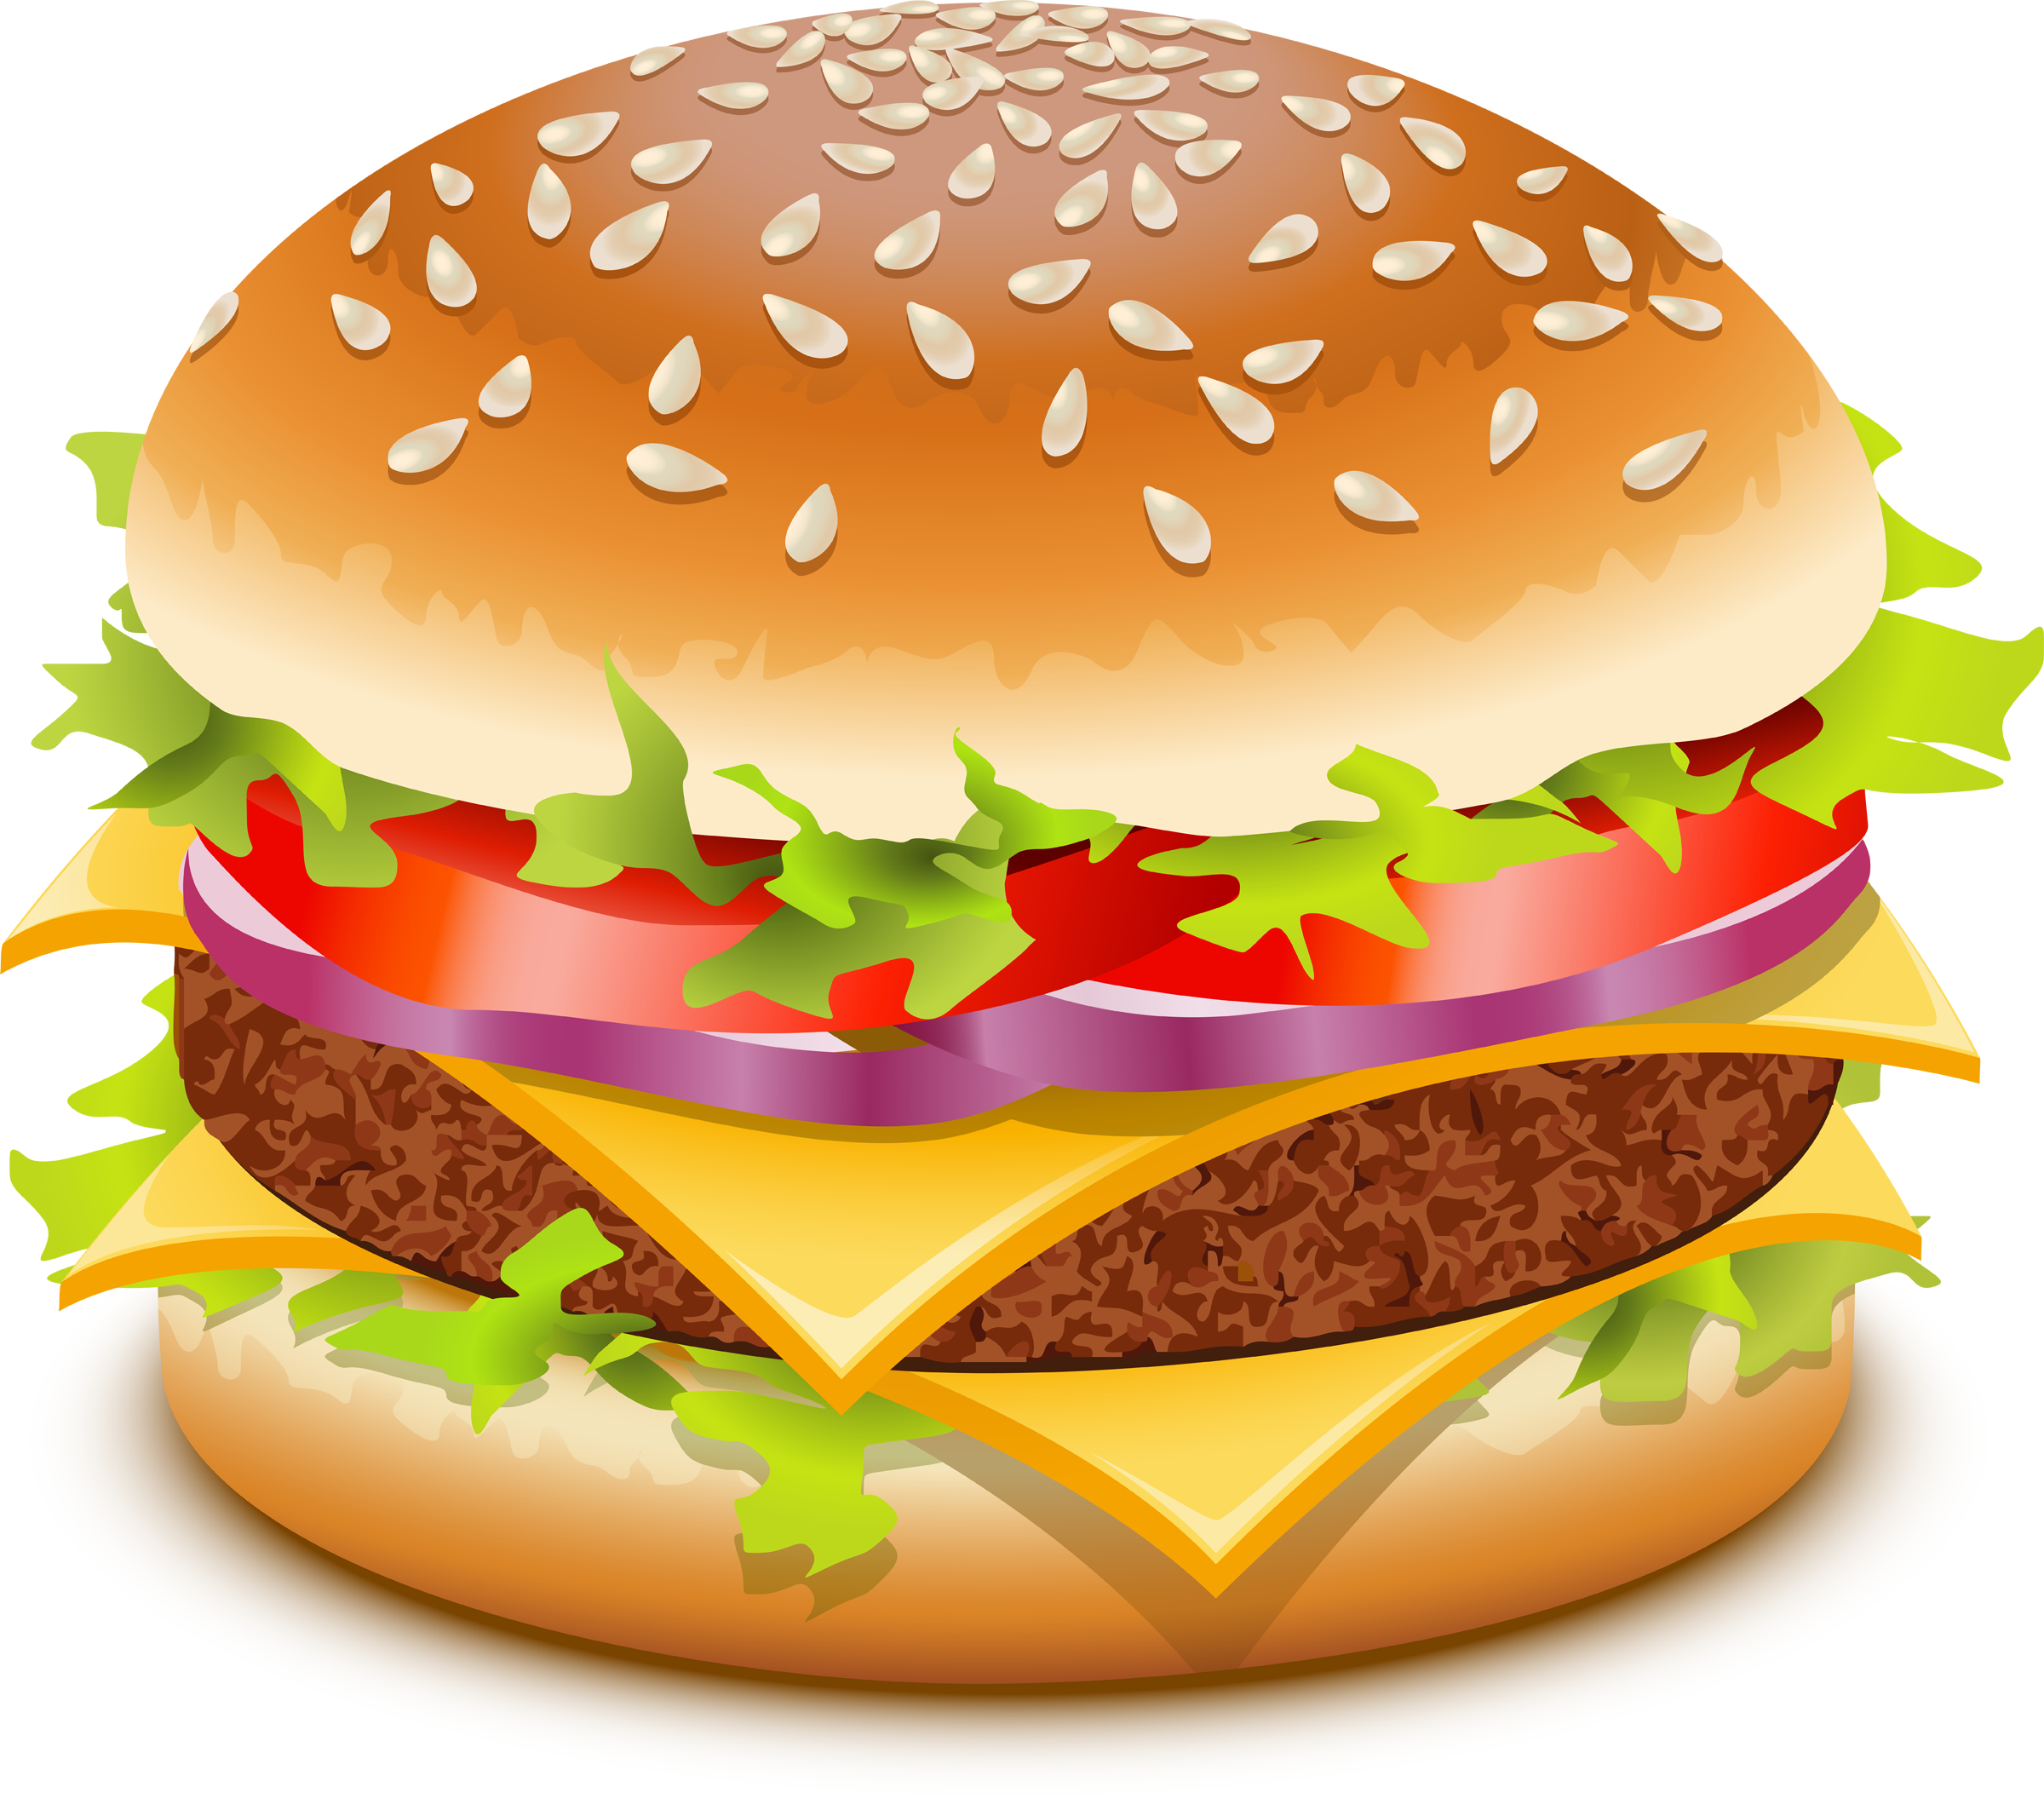 Hamburger Burger And Sandwich Images Download Pictures - Hamburgers Hot Dogs, Transparent background PNG HD thumbnail